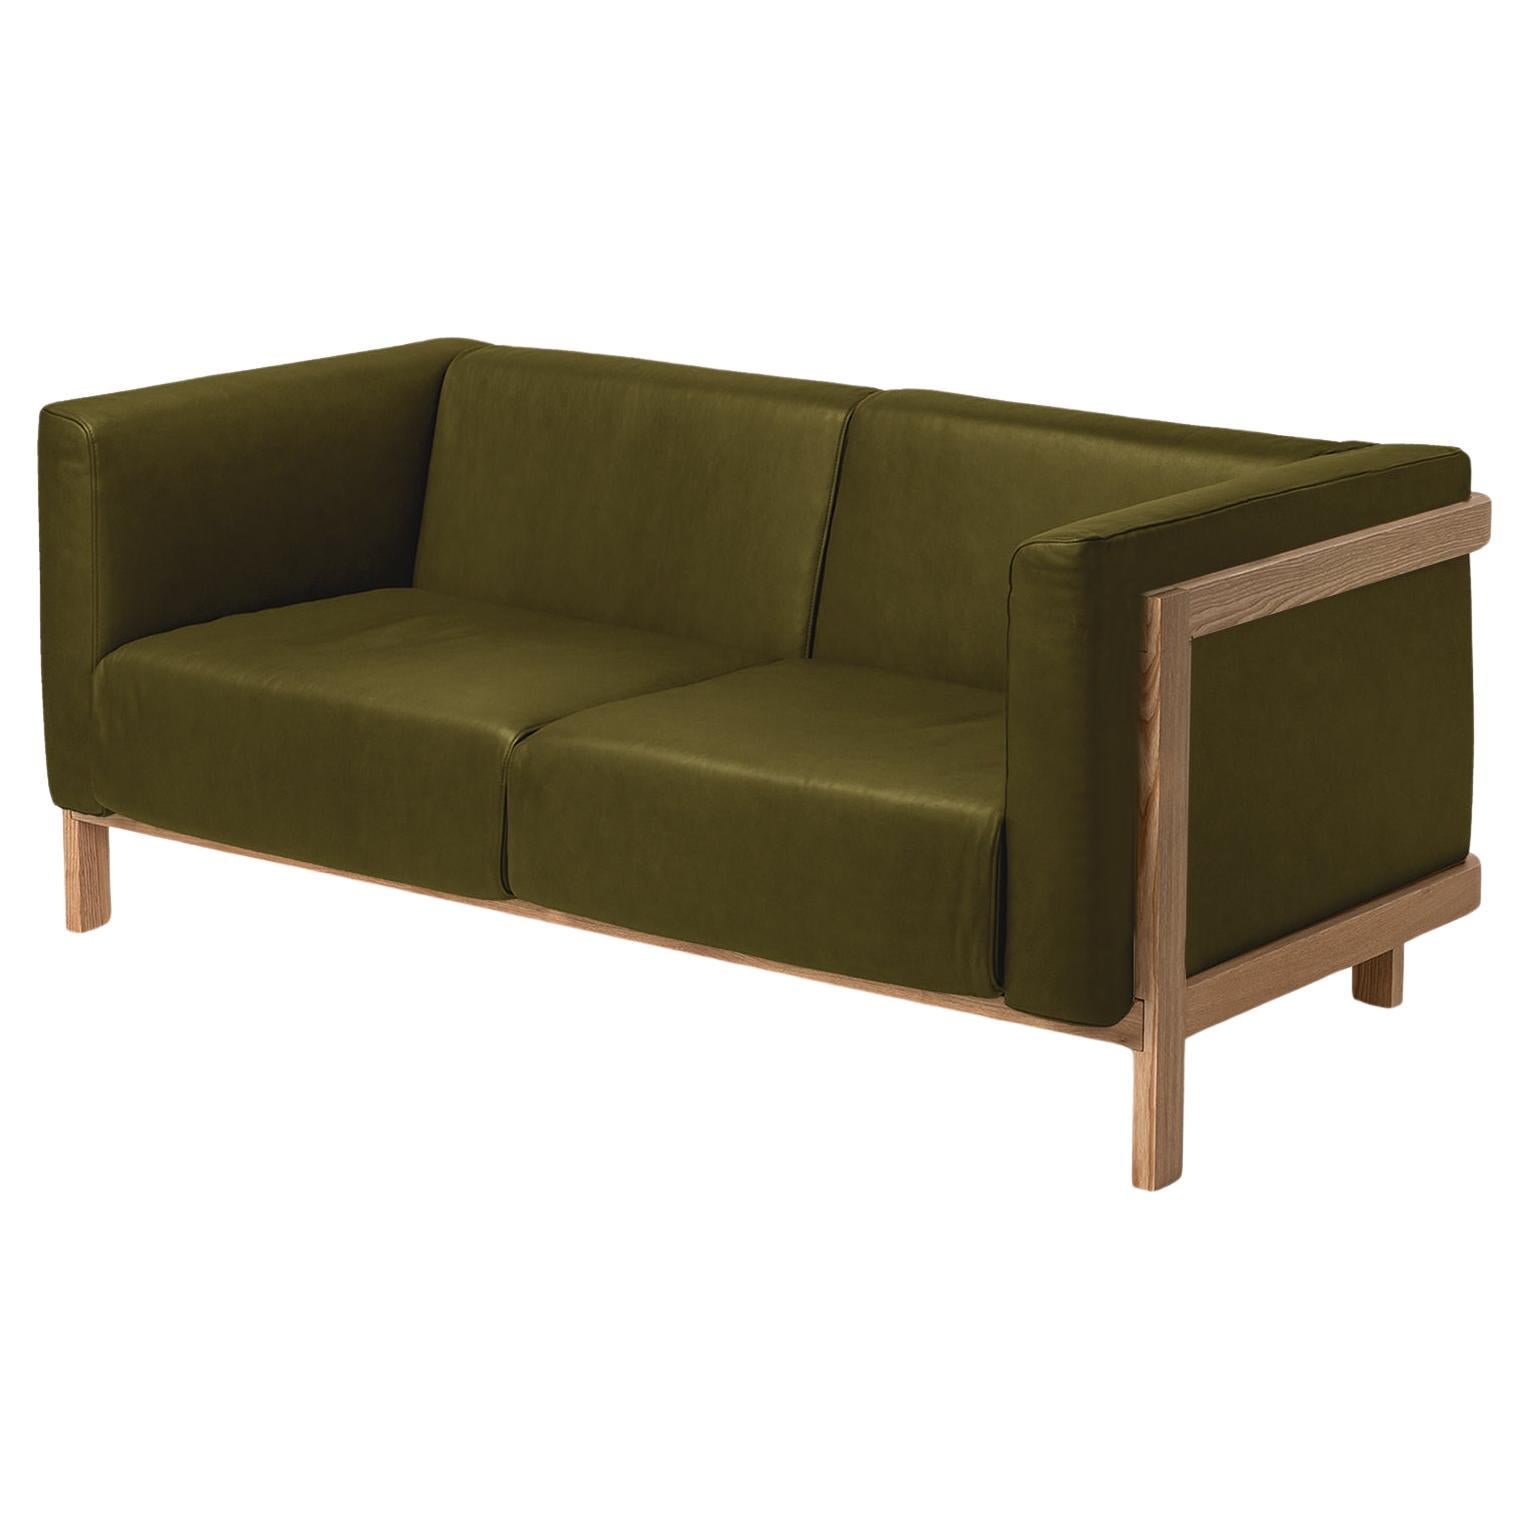 Minimalist two seater sofa ash - leather upholstered For Sale